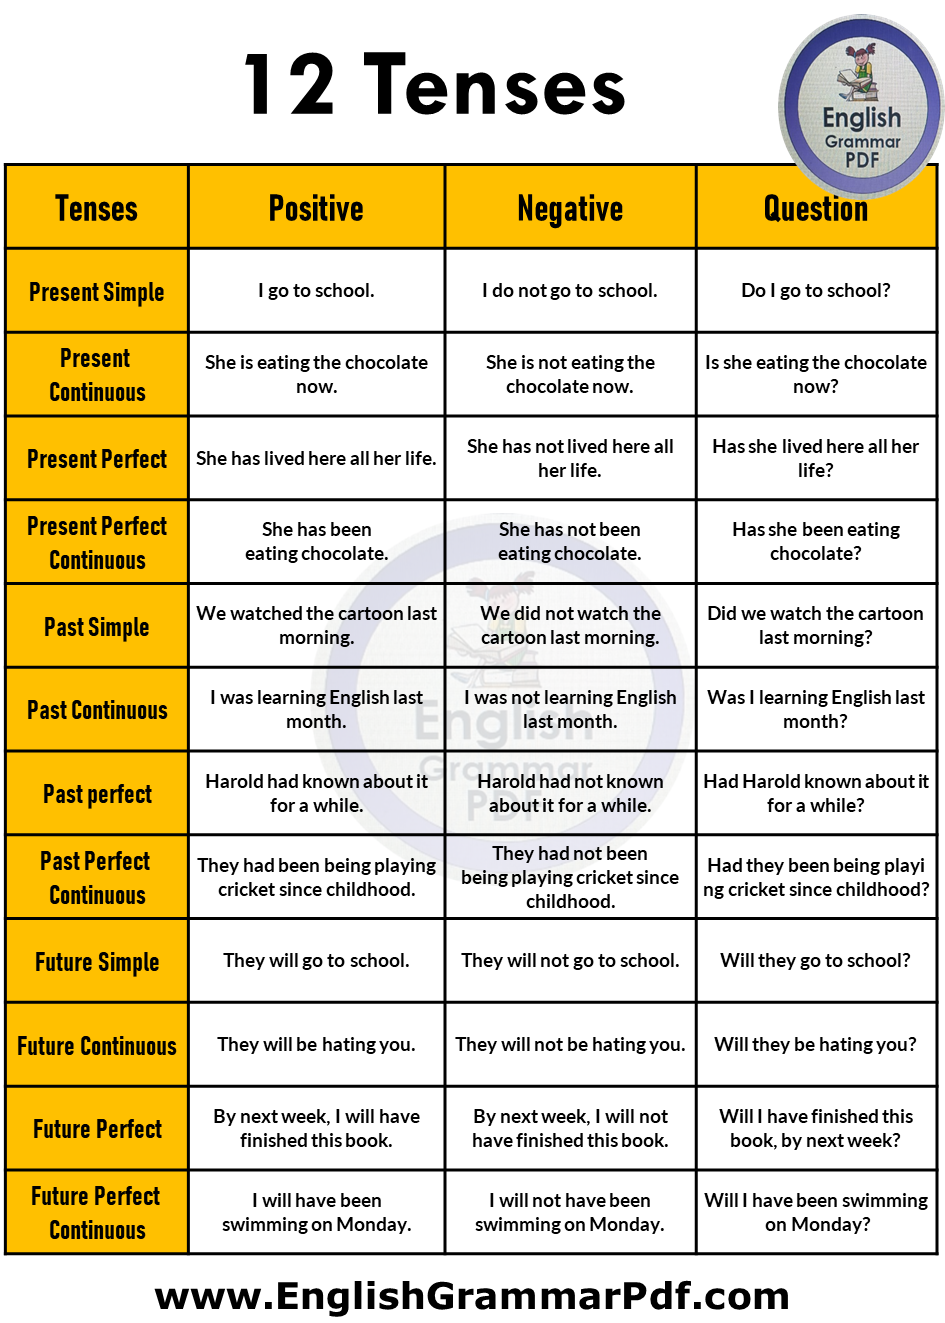 12 Tenses and 36 Example Sentences